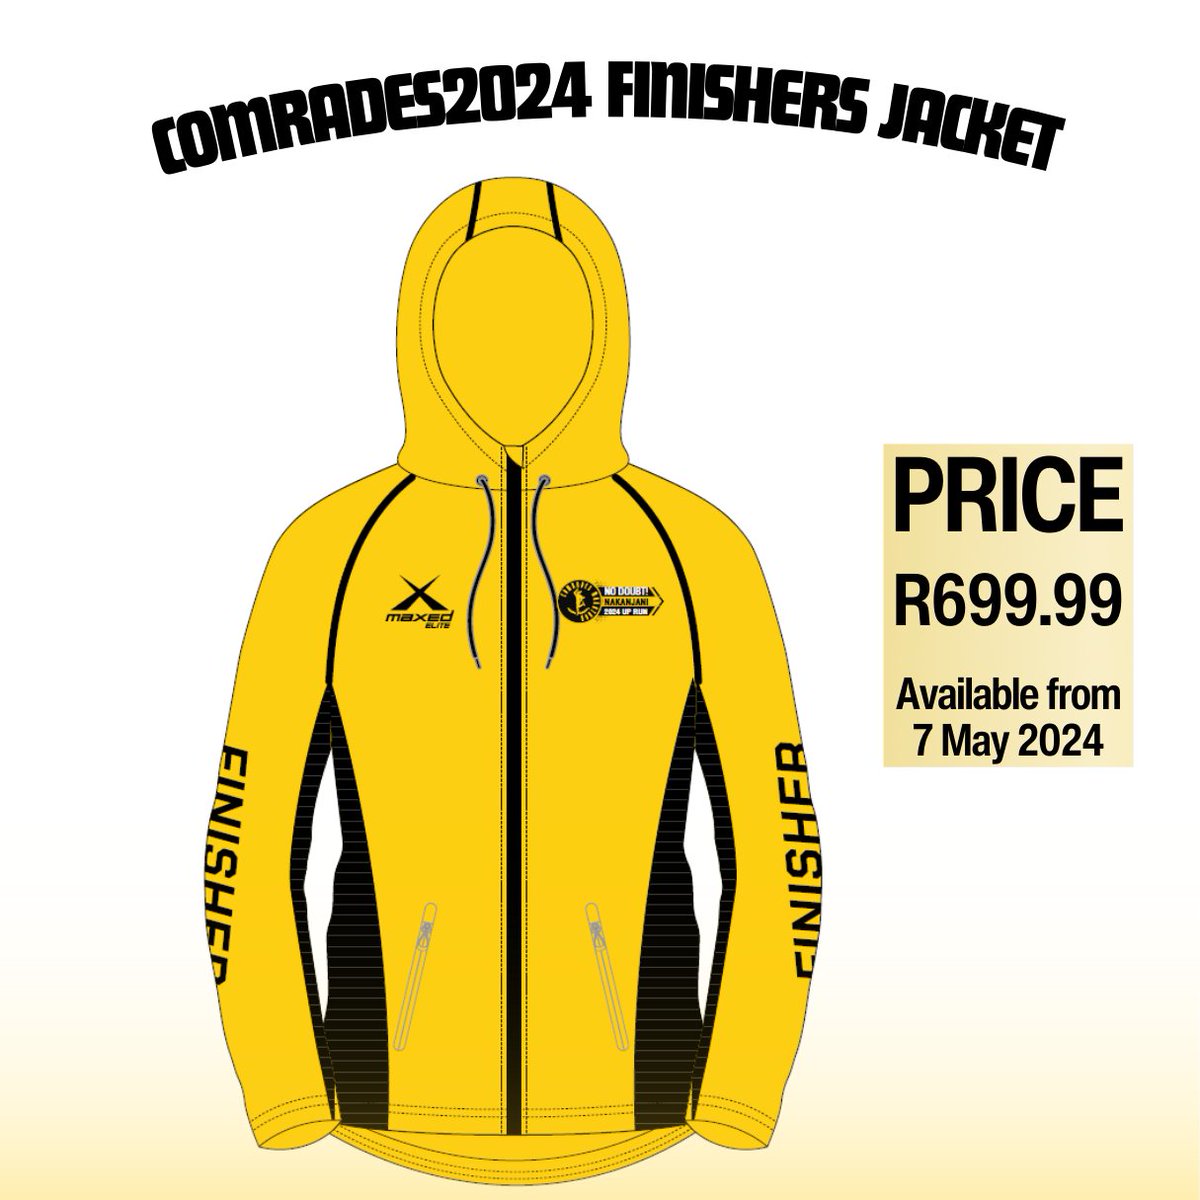 #Comrades2024 𝗙𝗶𝗻𝗶𝘀𝗵𝗲𝗿𝘀 𝗝𝗮𝗰𝗸𝗲𝘁 𝗼𝗻 𝘀𝗮𝗹𝗲 𝗳𝗿𝗼𝗺 𝘁𝗼𝗺𝗼𝗿𝗿𝗼𝘄

If you are gearing up for The Ultimate Human Race on Sunday, 9 June 2024, then you’re in for a remarkable experience.